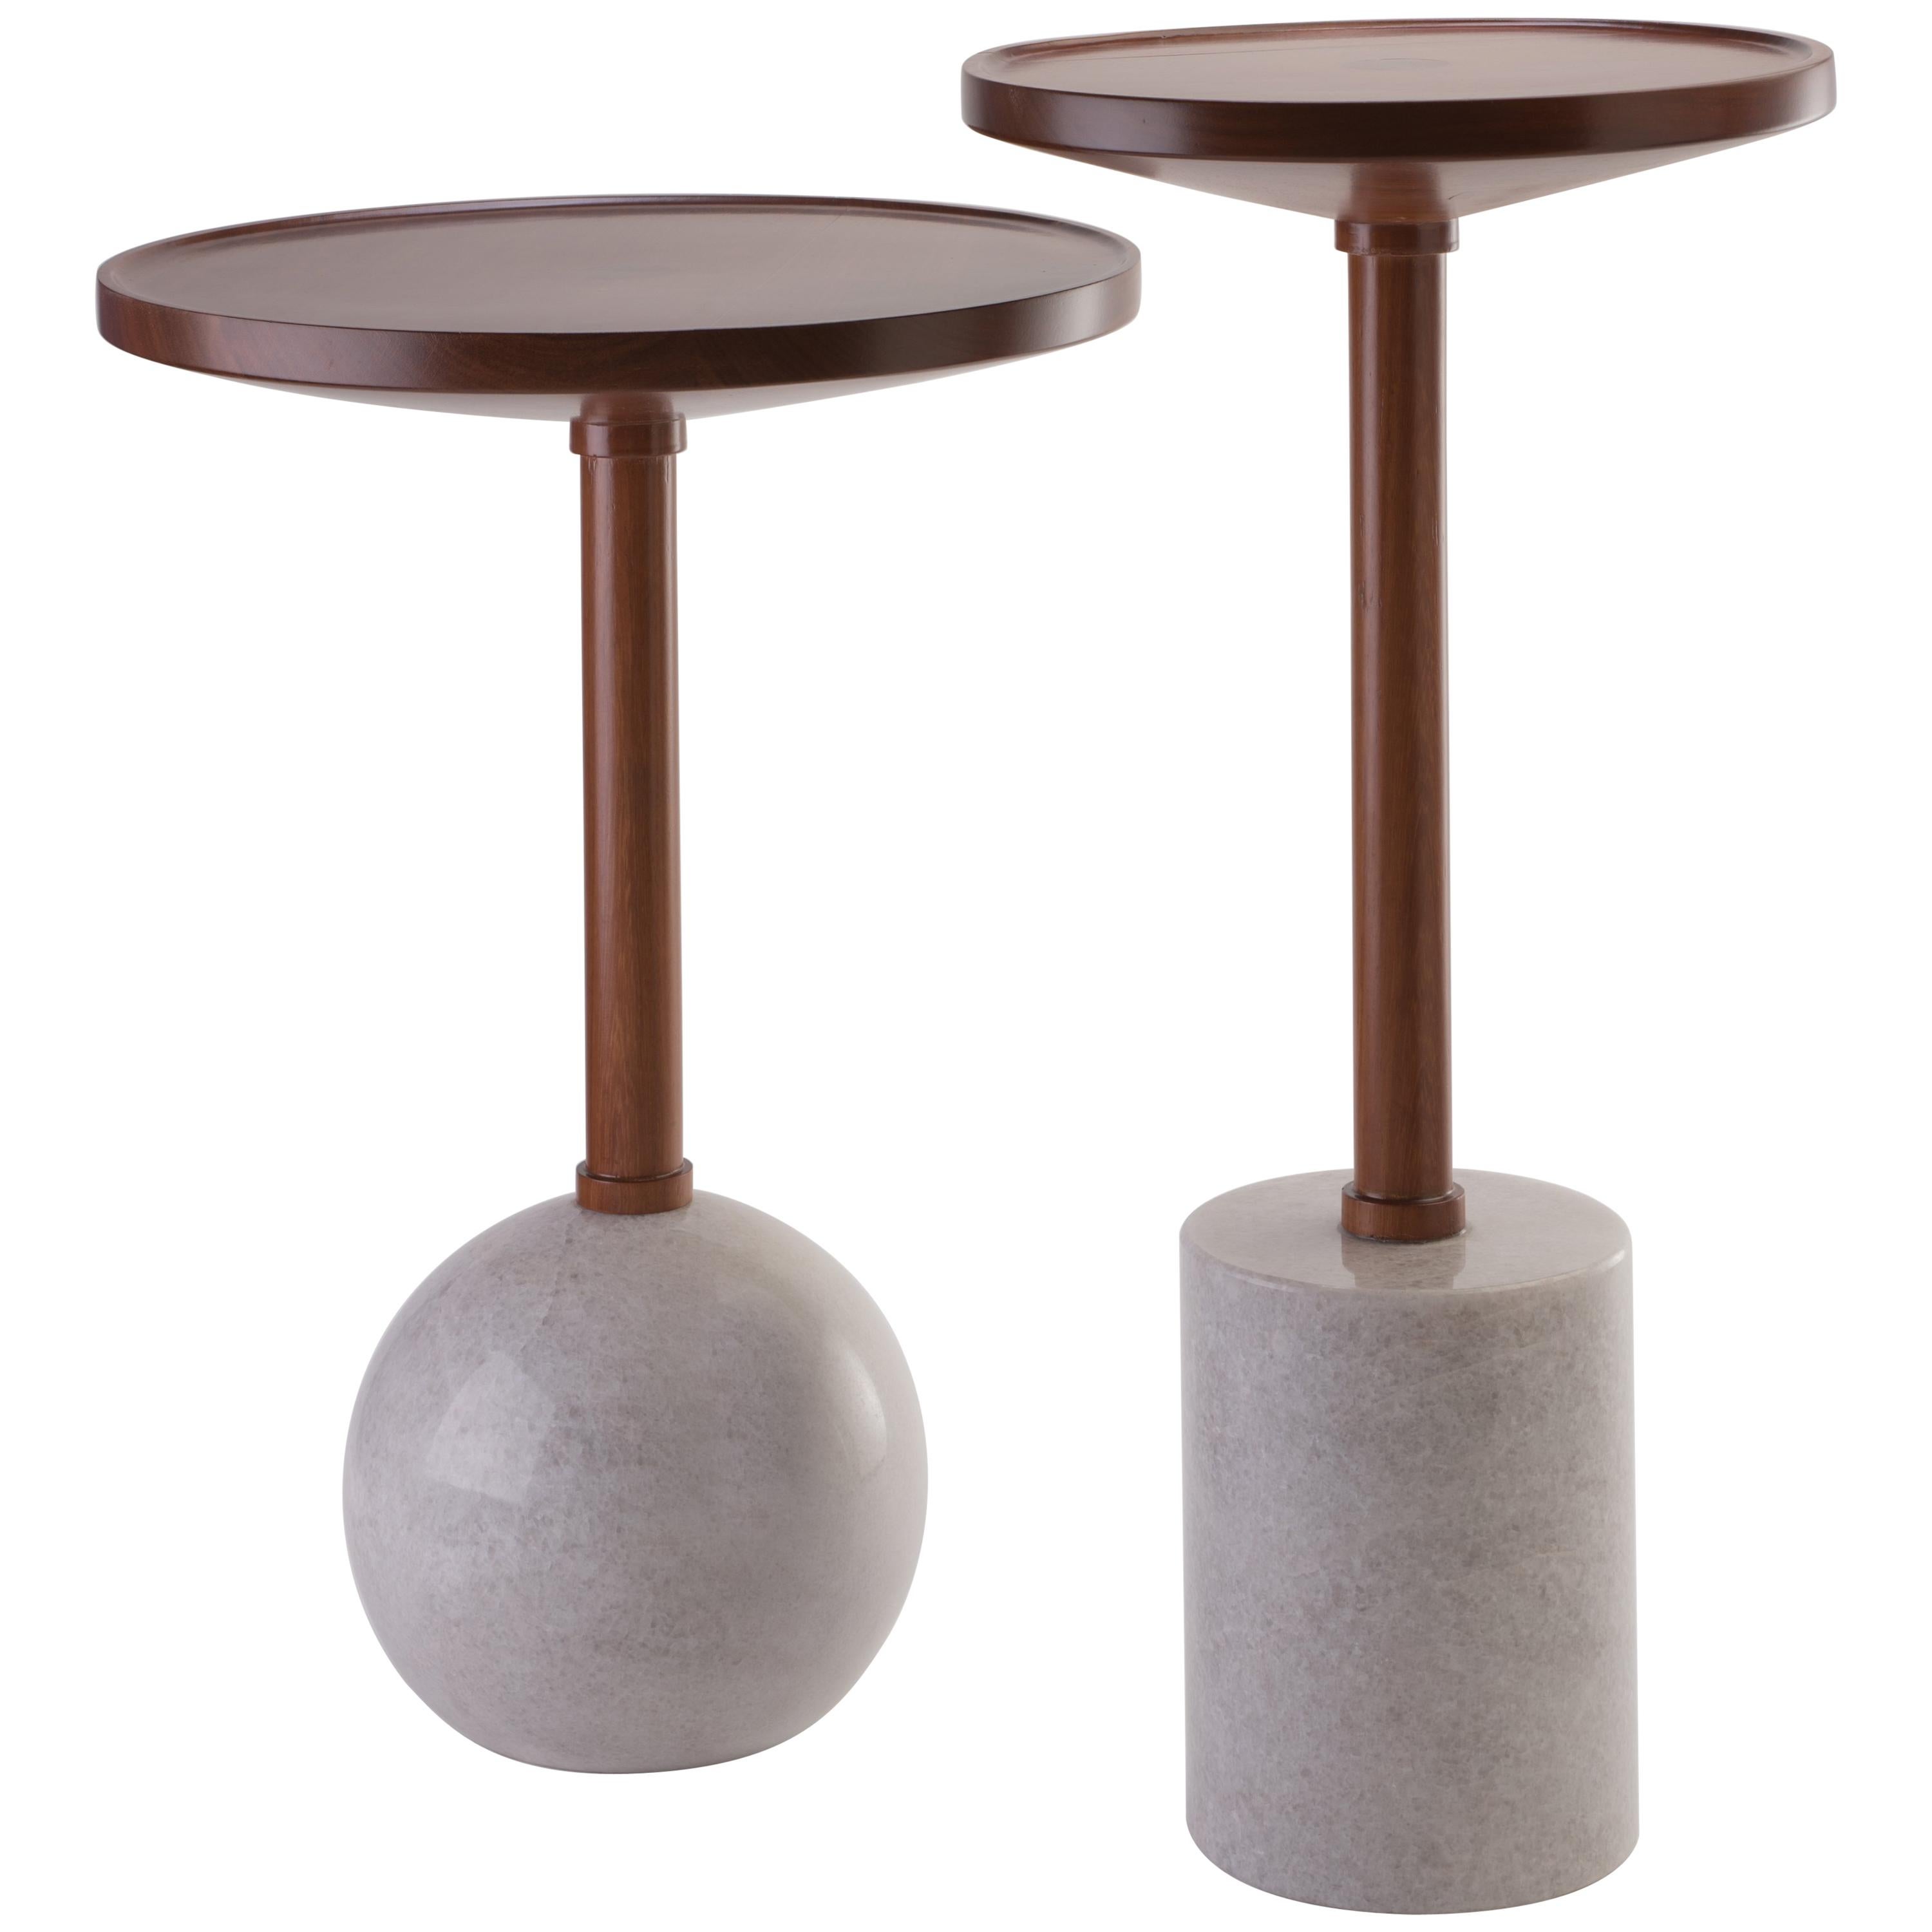 Honouring the process of craftsmanship, geometry makes poetry in the Mesas Monterrey. Both tables are turned by hand; the bases are made of a marble cylinder and sphere, the tops are made of solid tzalam wood in two different diameters. With